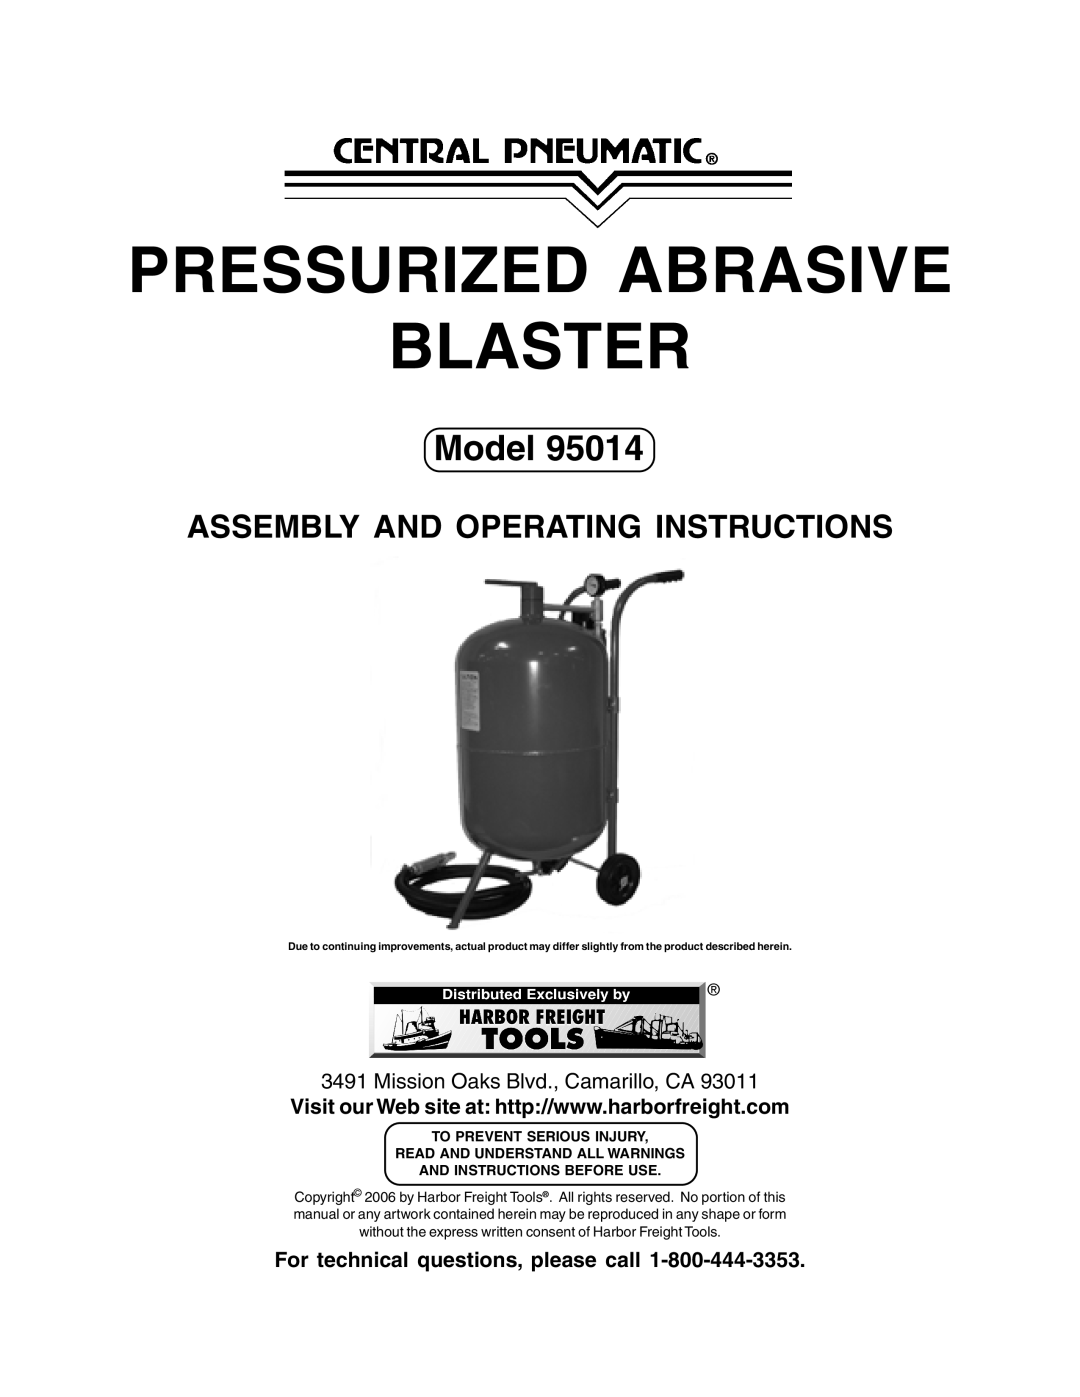 Harbor Freight Tools 95014 operating instructions For technical questions, please call, Pressurized Abrasive Blaster 